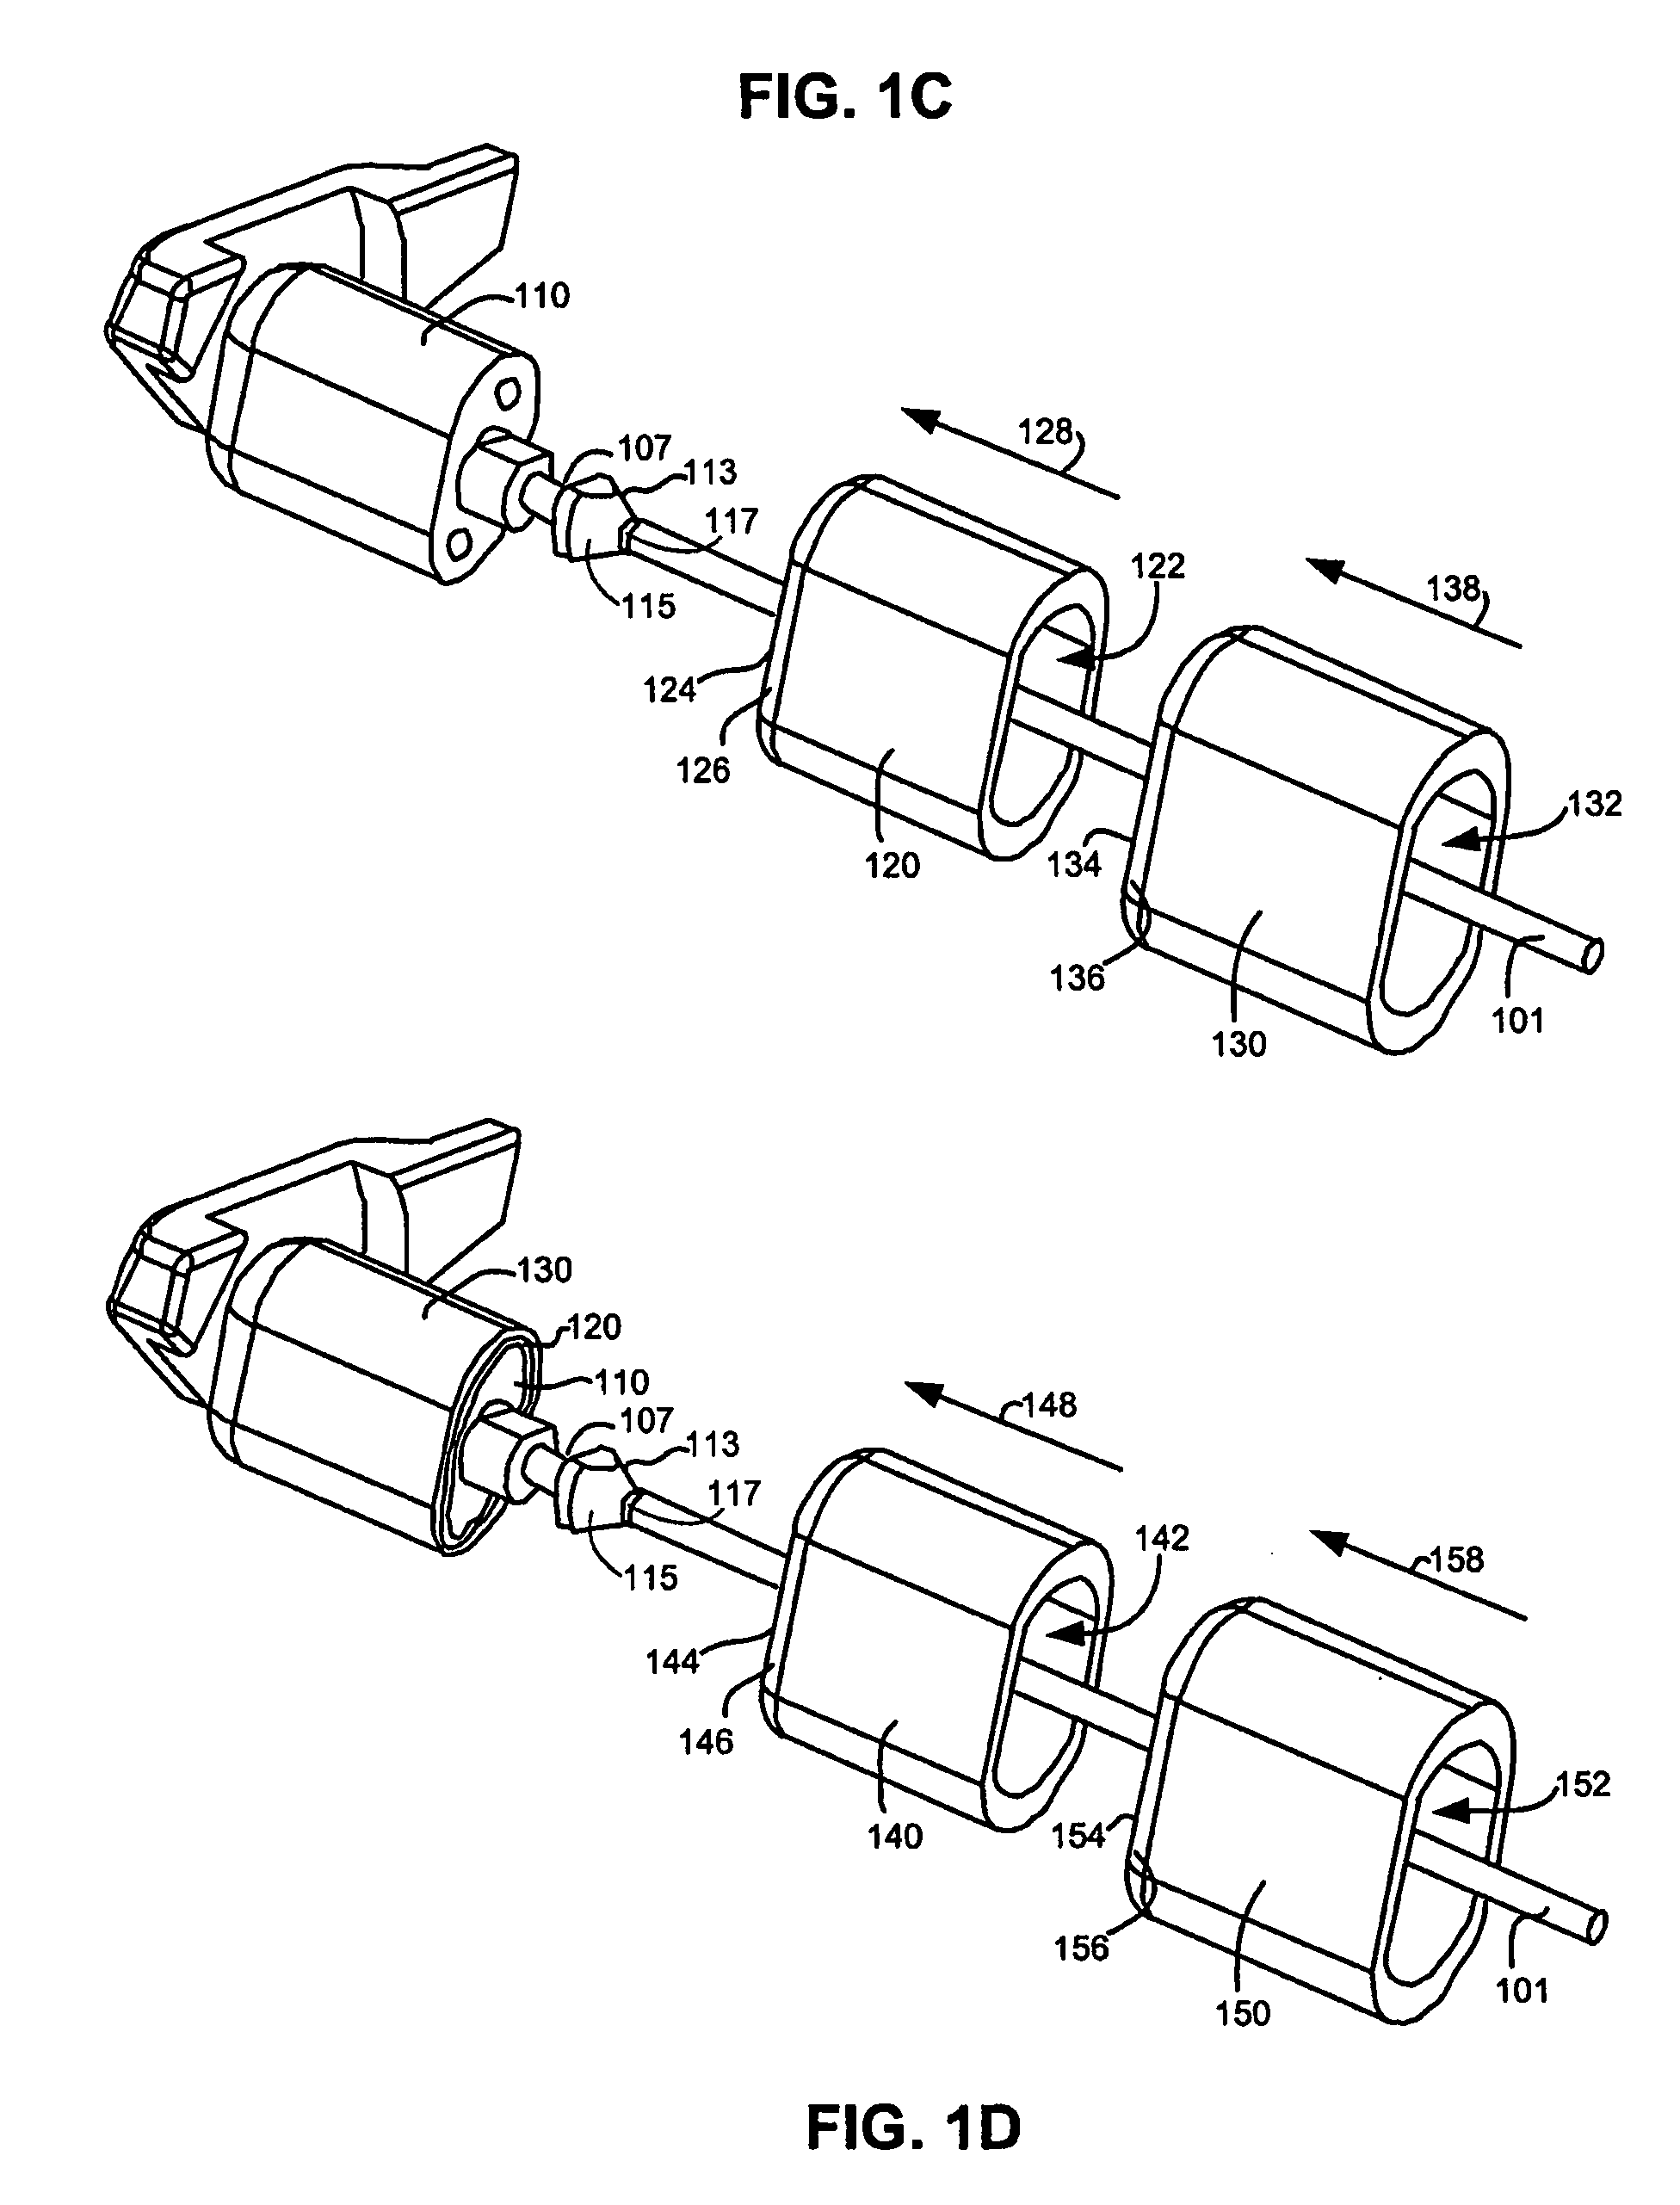 Systems and methods for in situ assembly of an interspinous process distraction implant